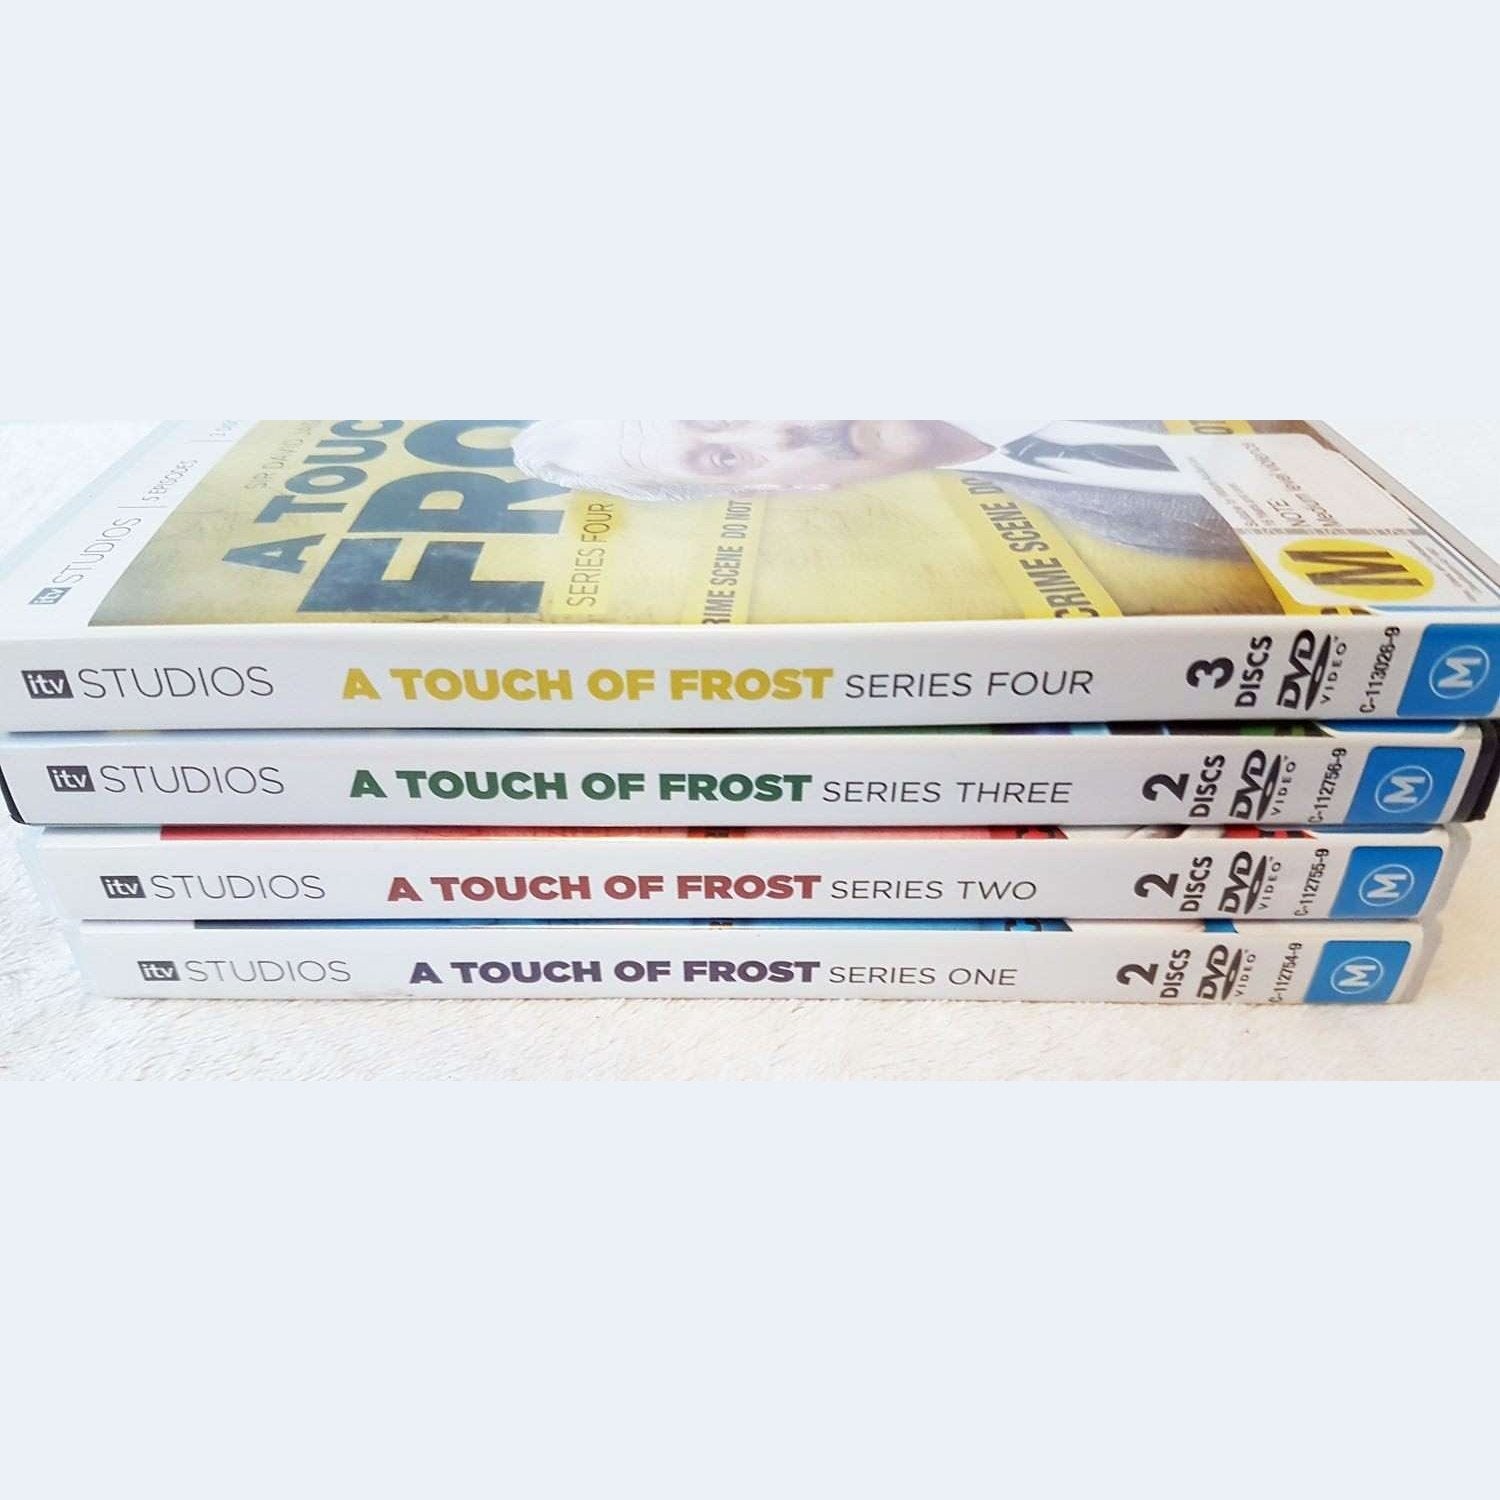 A Touch of Frost Series 1-4 11 Disc Set